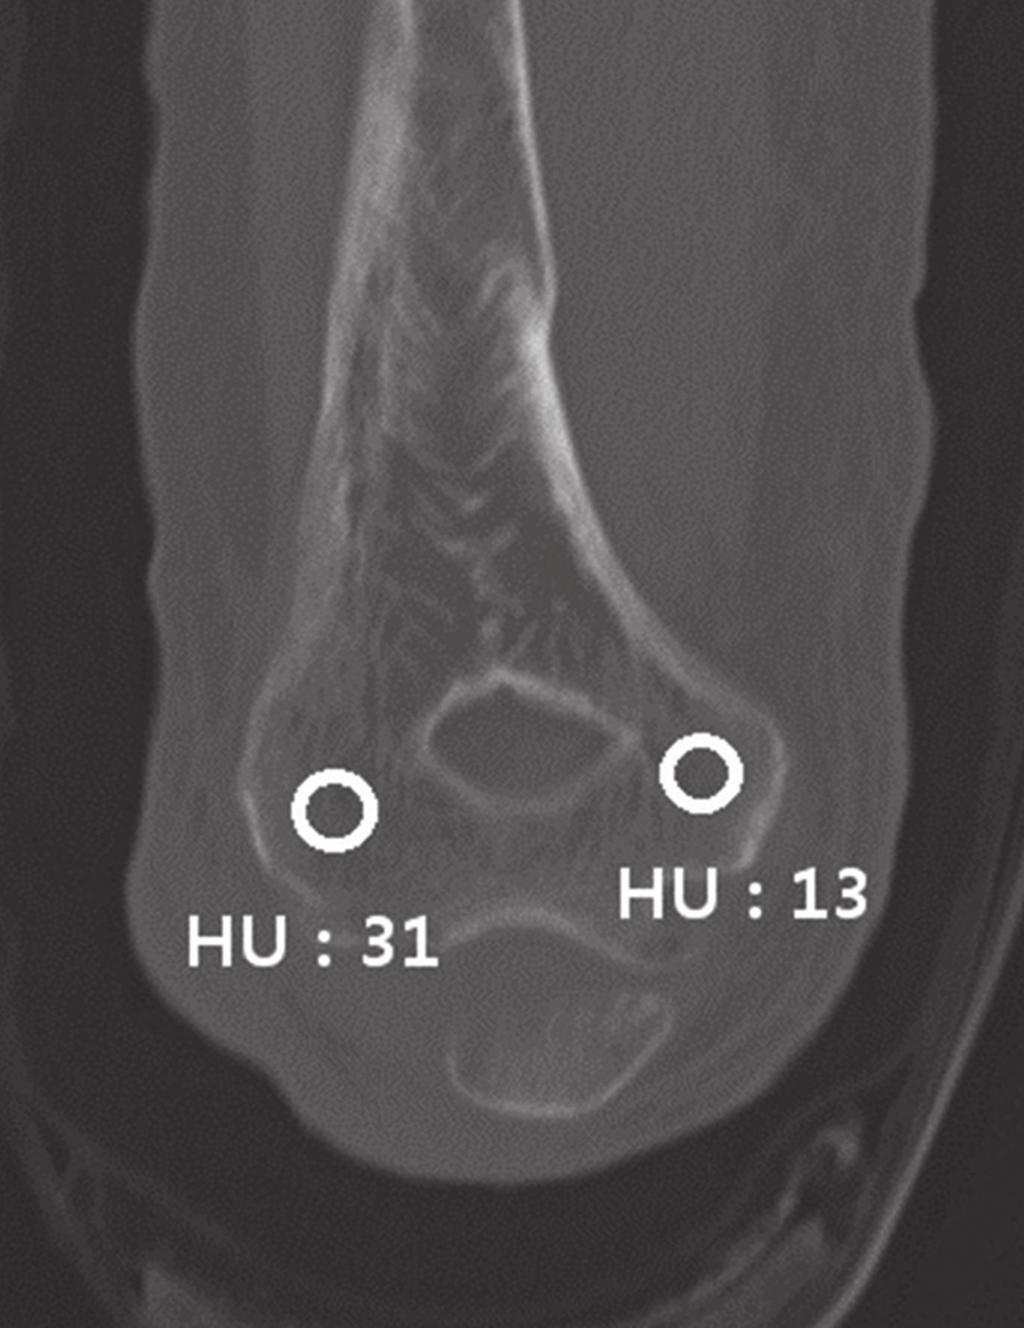 Seong Cheol Park, et al. showing that they have features of osteoporotic fracture. A few studies have mentioned that radial head and distal humerus fractures are potentially osteoporotic fractures.